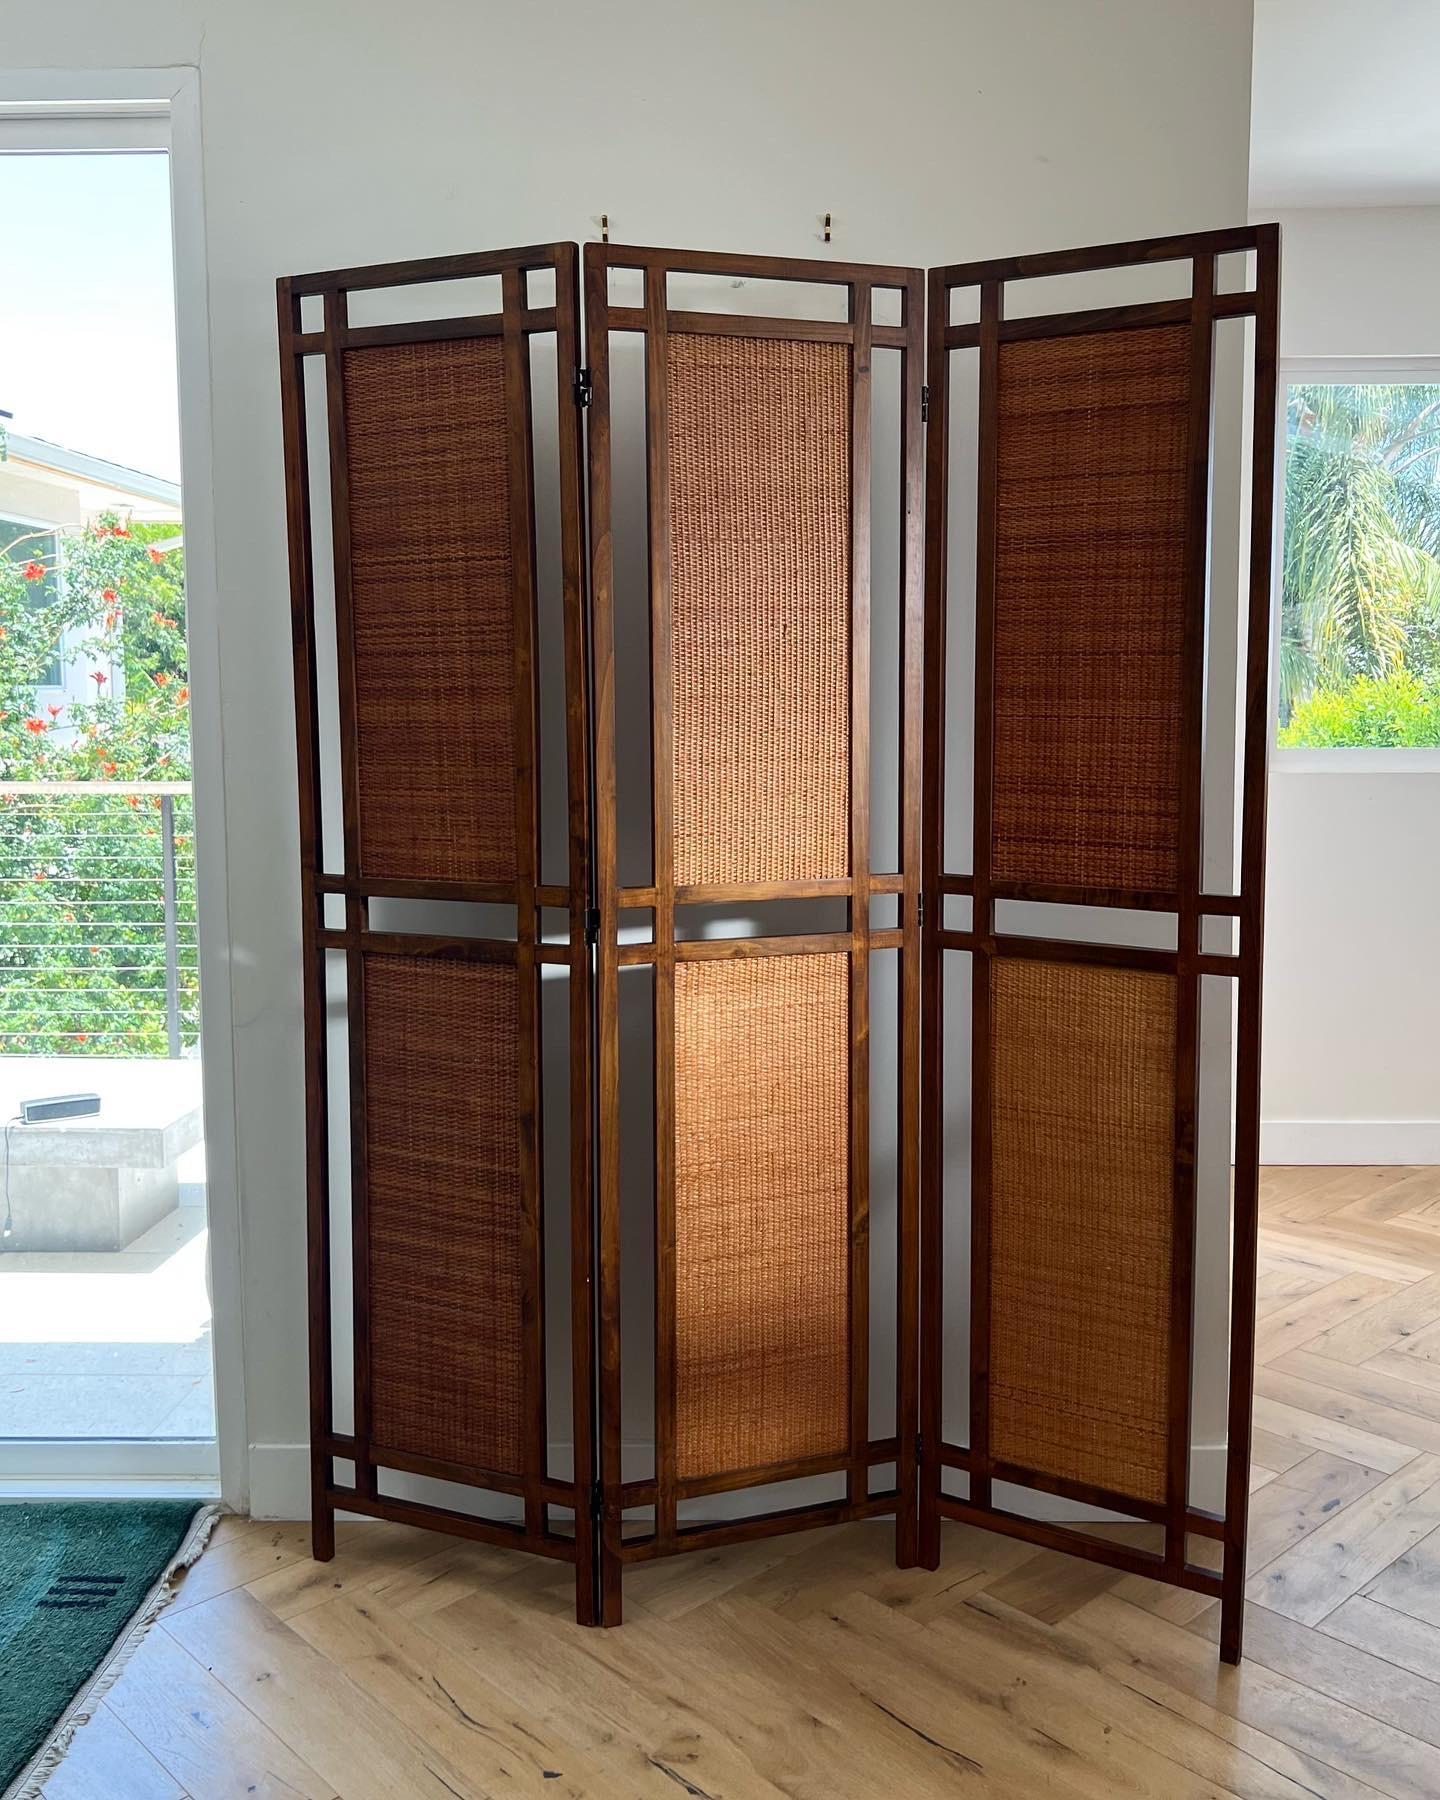 A mid century room divider in rattan and teak, 1960s. Minor signs of age (as shown in photos) but overall fabulous vintage condition. Pick up in LA or worldwide shipping available.
Dimensions: 
54” W x .8” D x 70” H
Each panel: 18” W.